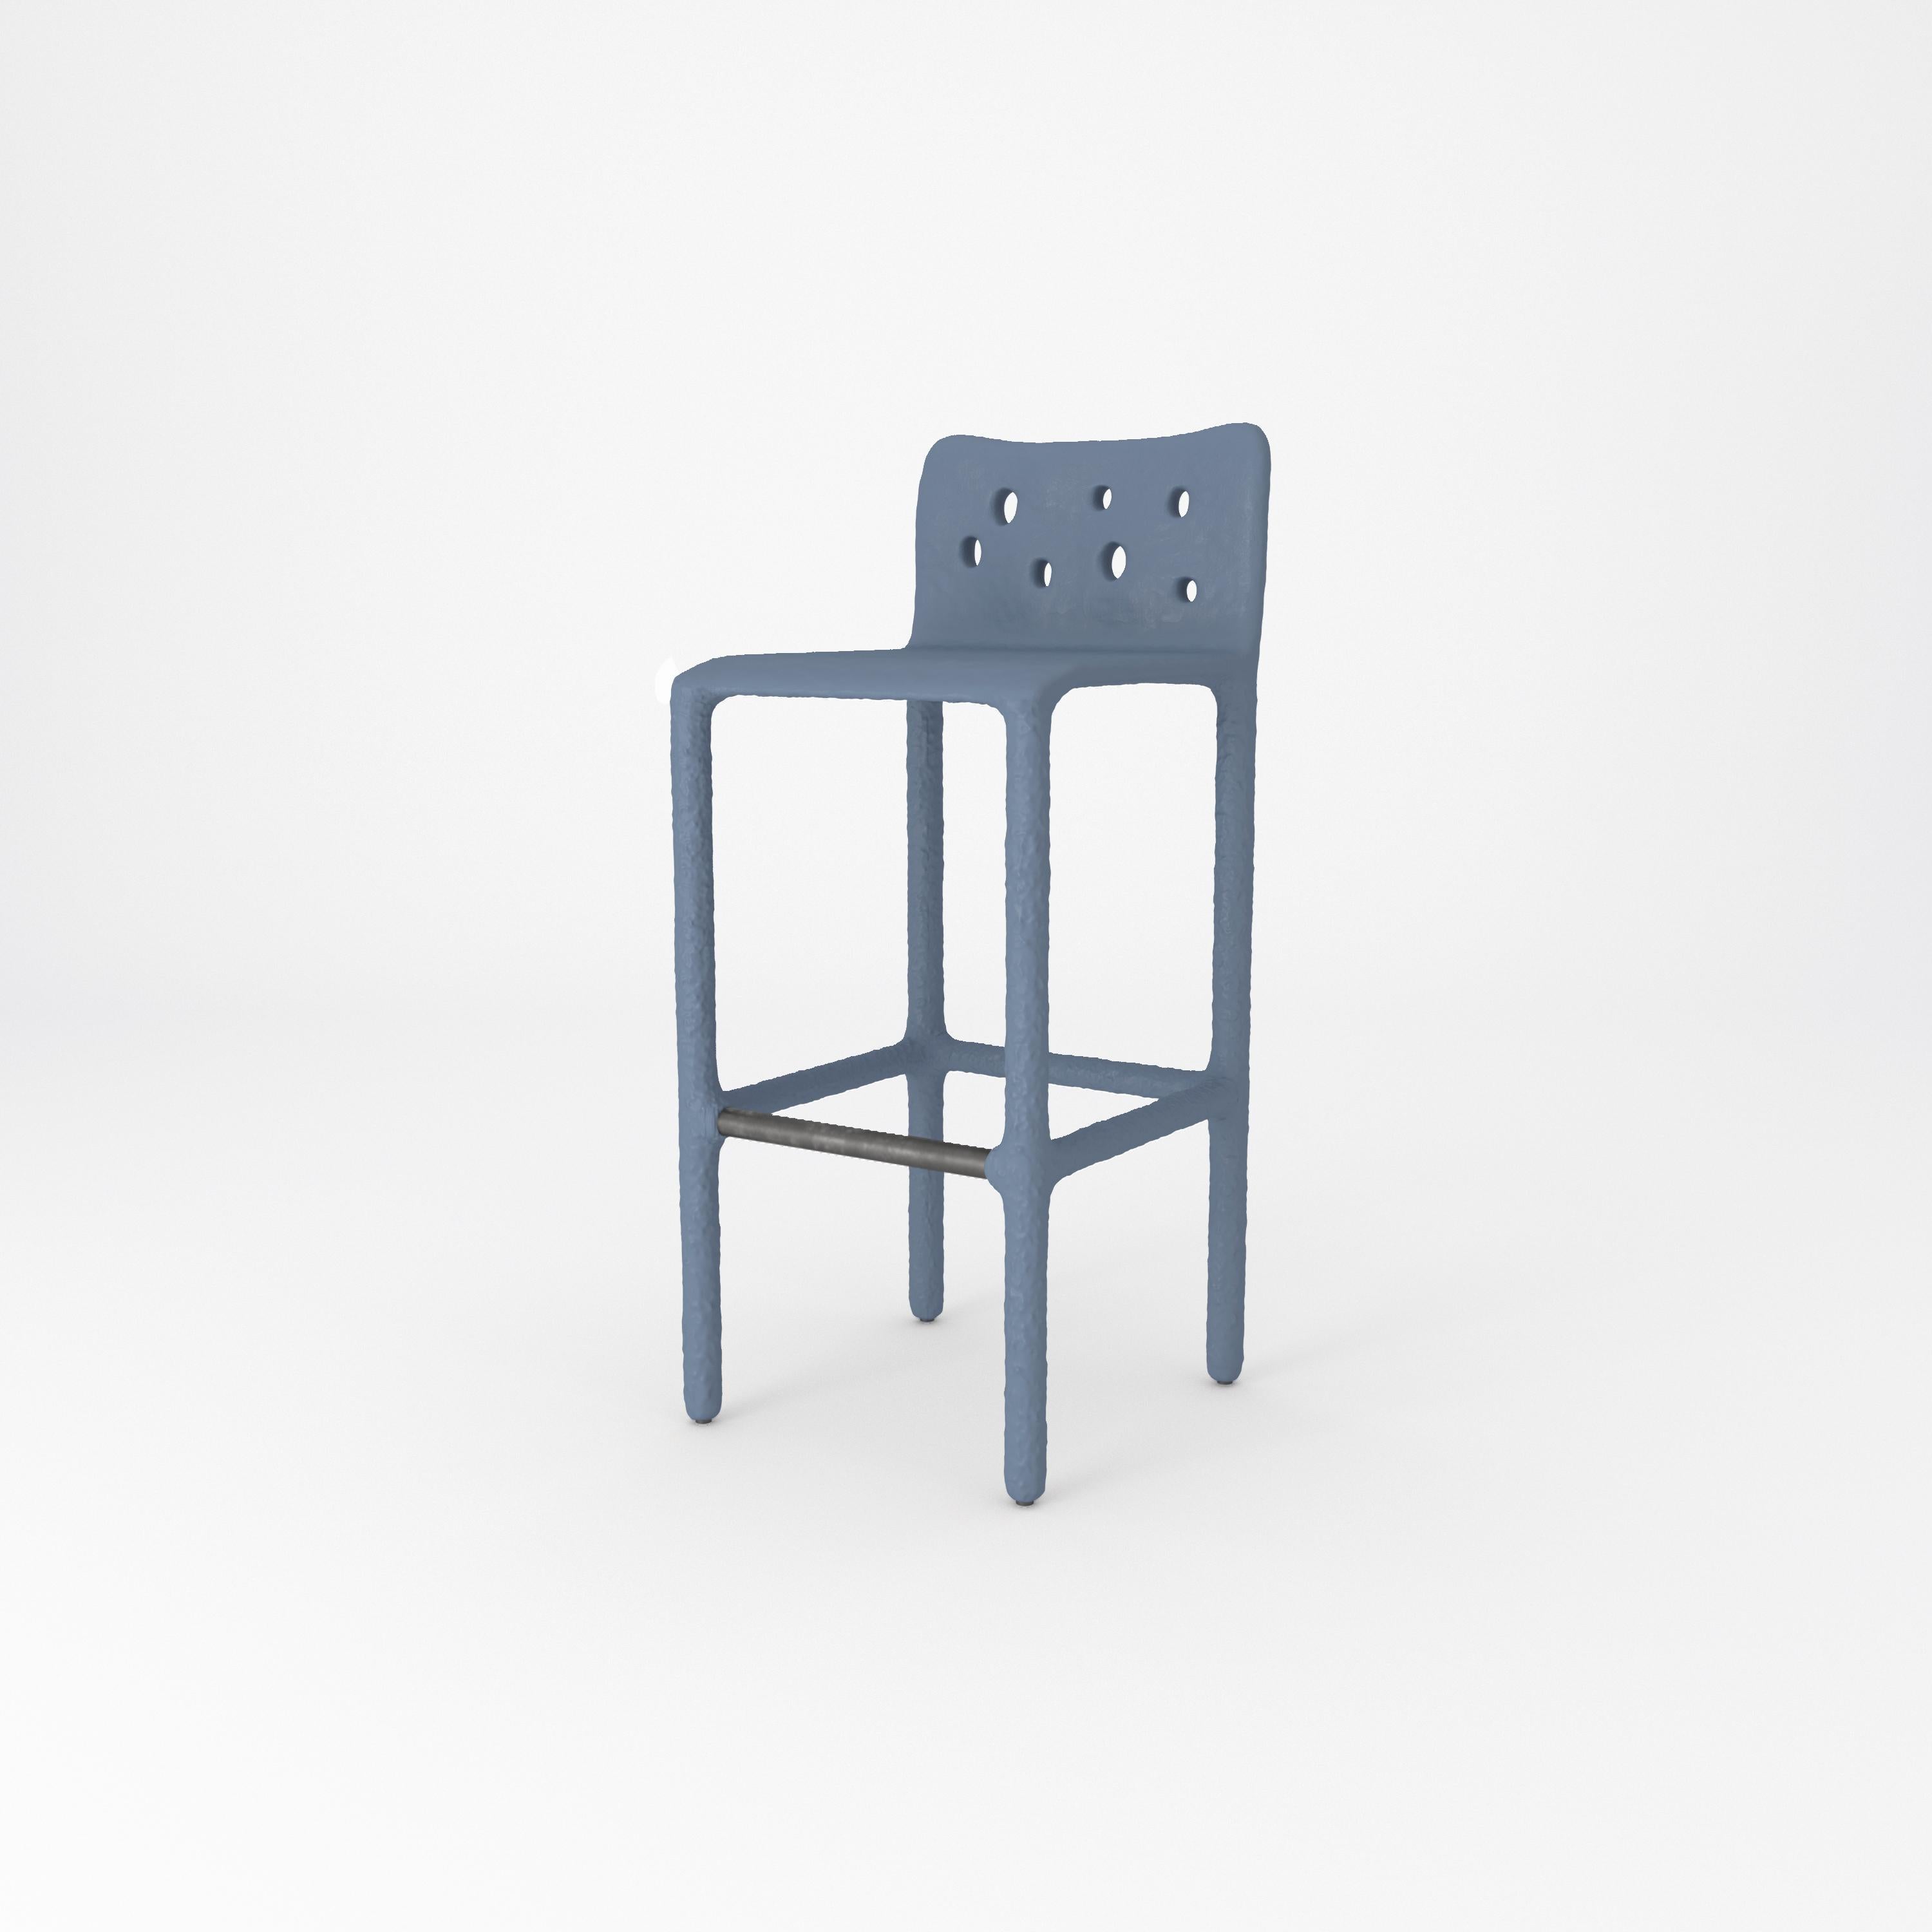 Blue sculpted contemporary chair by Faina
Design: Victoriya Yakusha
Material: steel, flax rubber, biopolymer, cellulose
Dimensions: Height: 106 x Width: 45 x Sitting place width: 49 Legs height: 80 cm
Weight: 20 kilos.
Outdoot finish